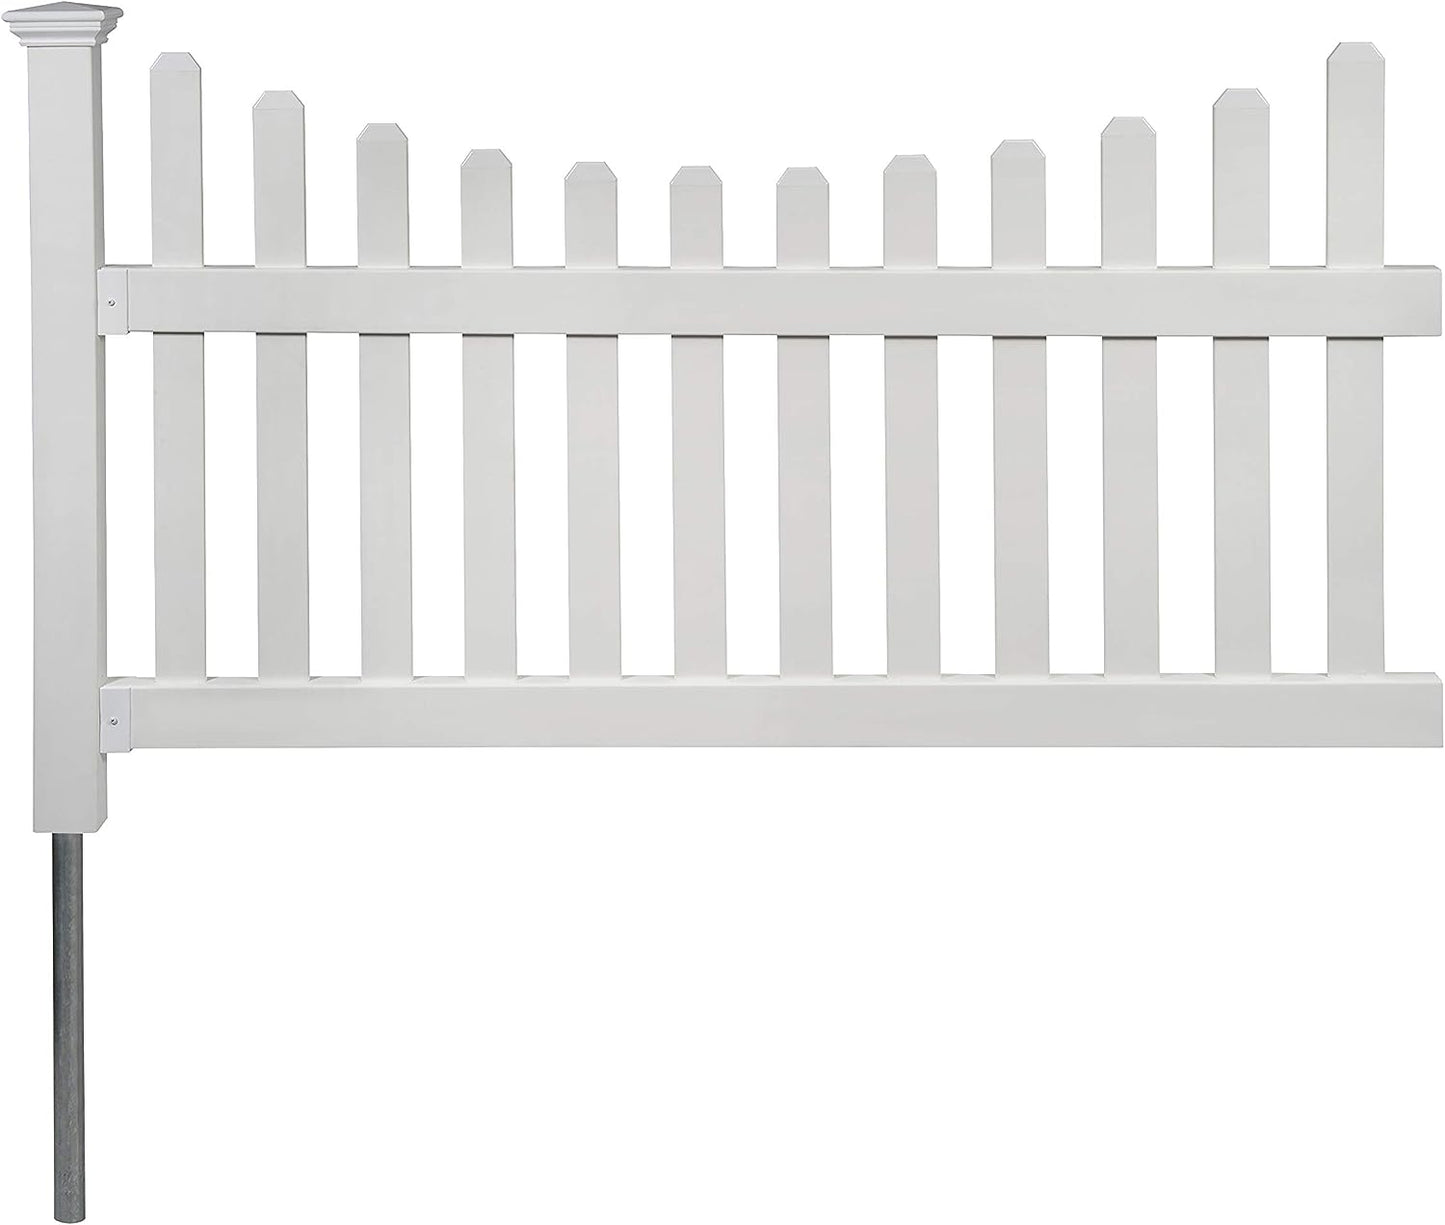 Zippity Outdoor Products ZP19041 No Dig All American Fence, White